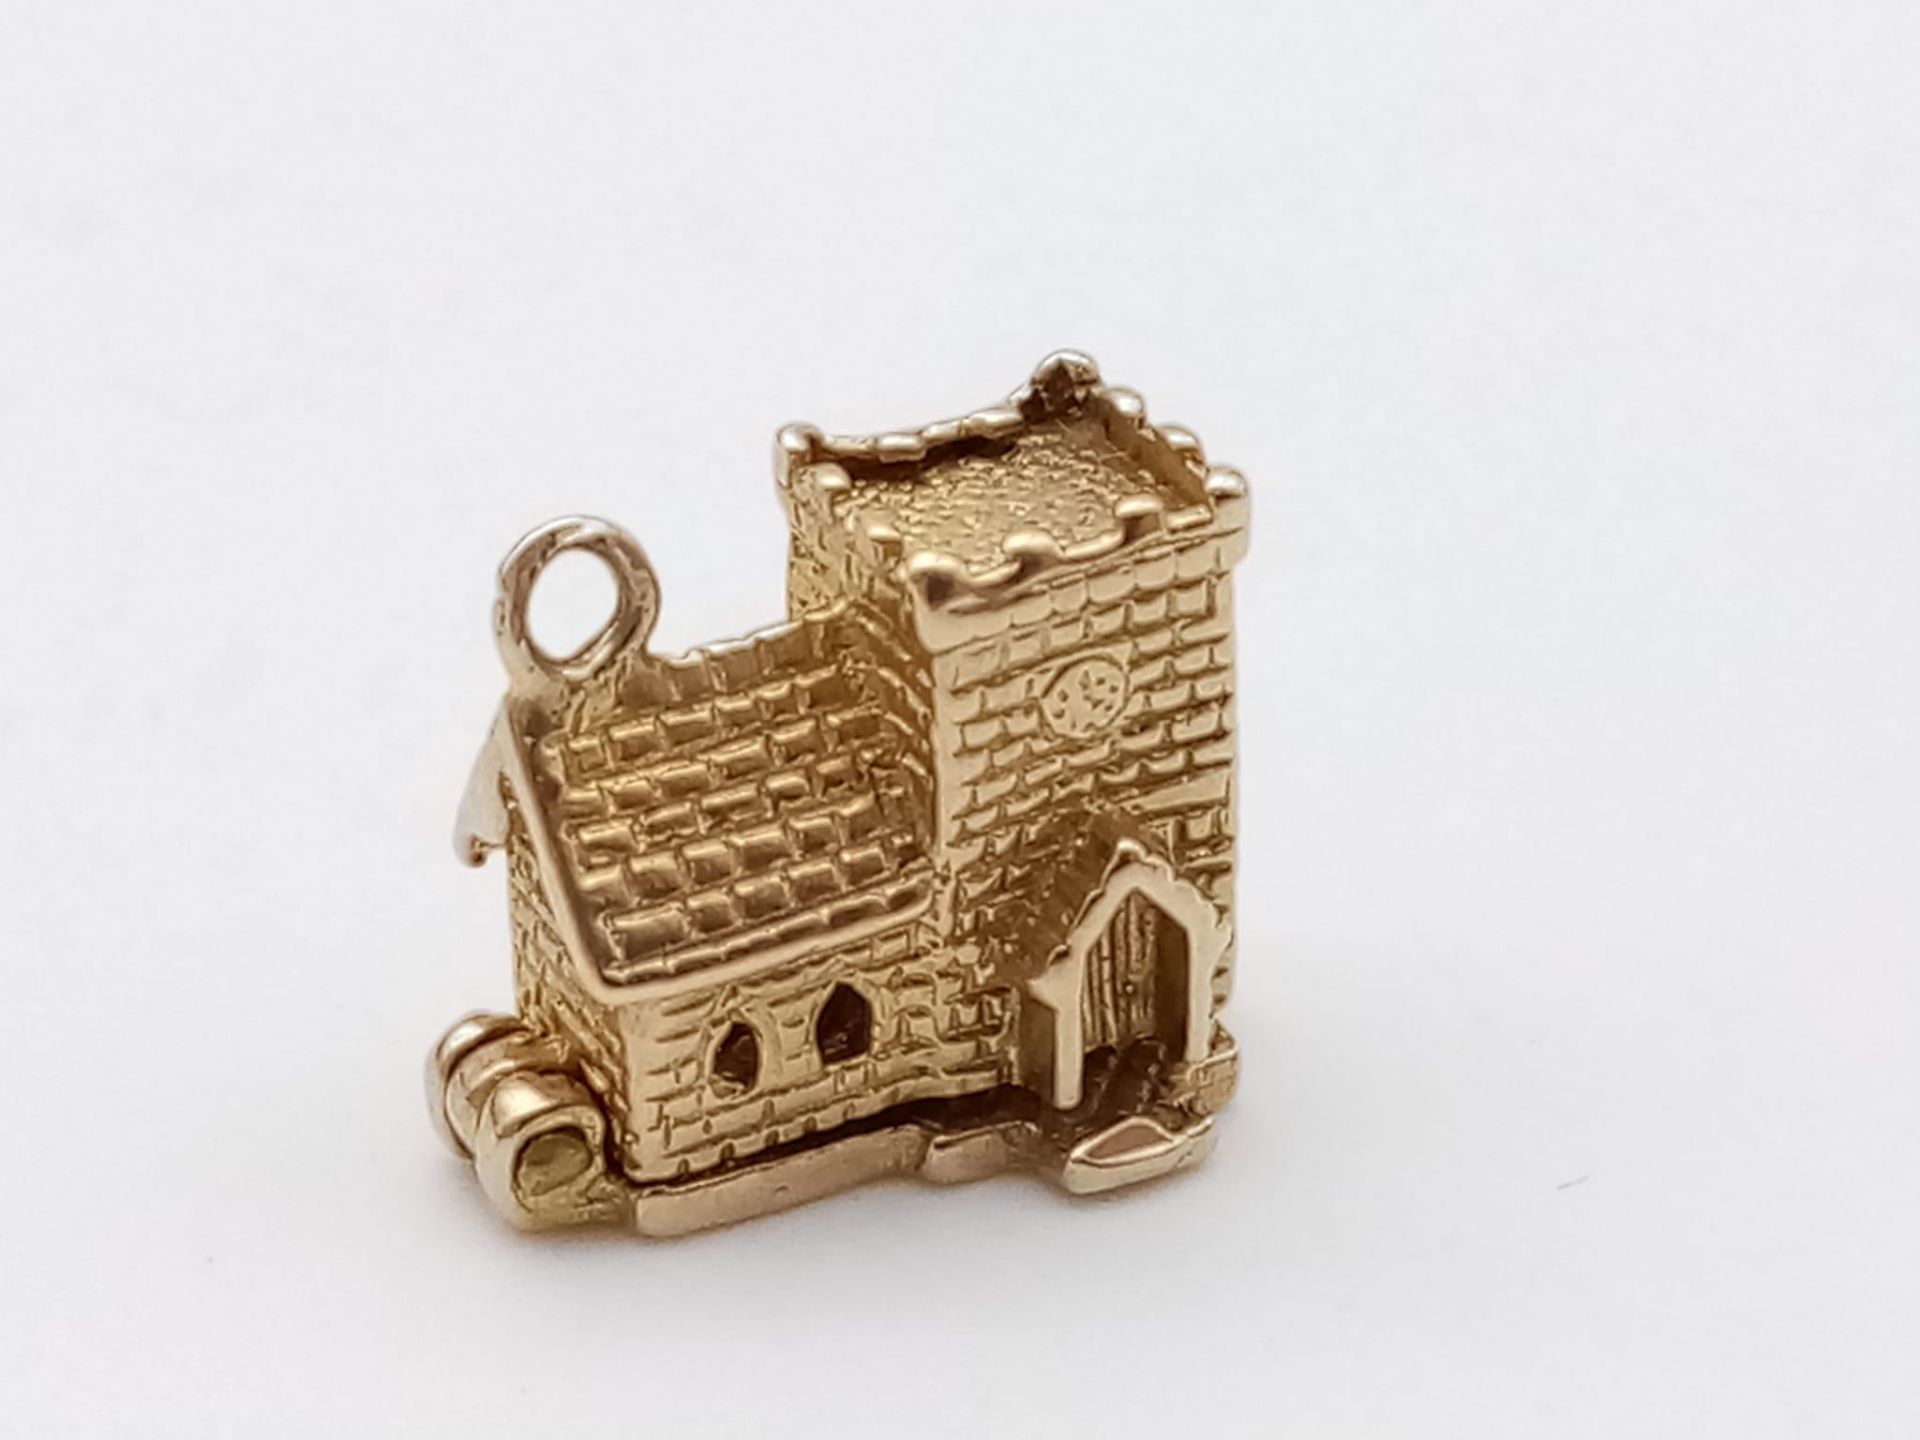 A 9K Yellow Gold Church Pendant/Charm, opens to reveal a wedding ceremony, 10mm. 2g